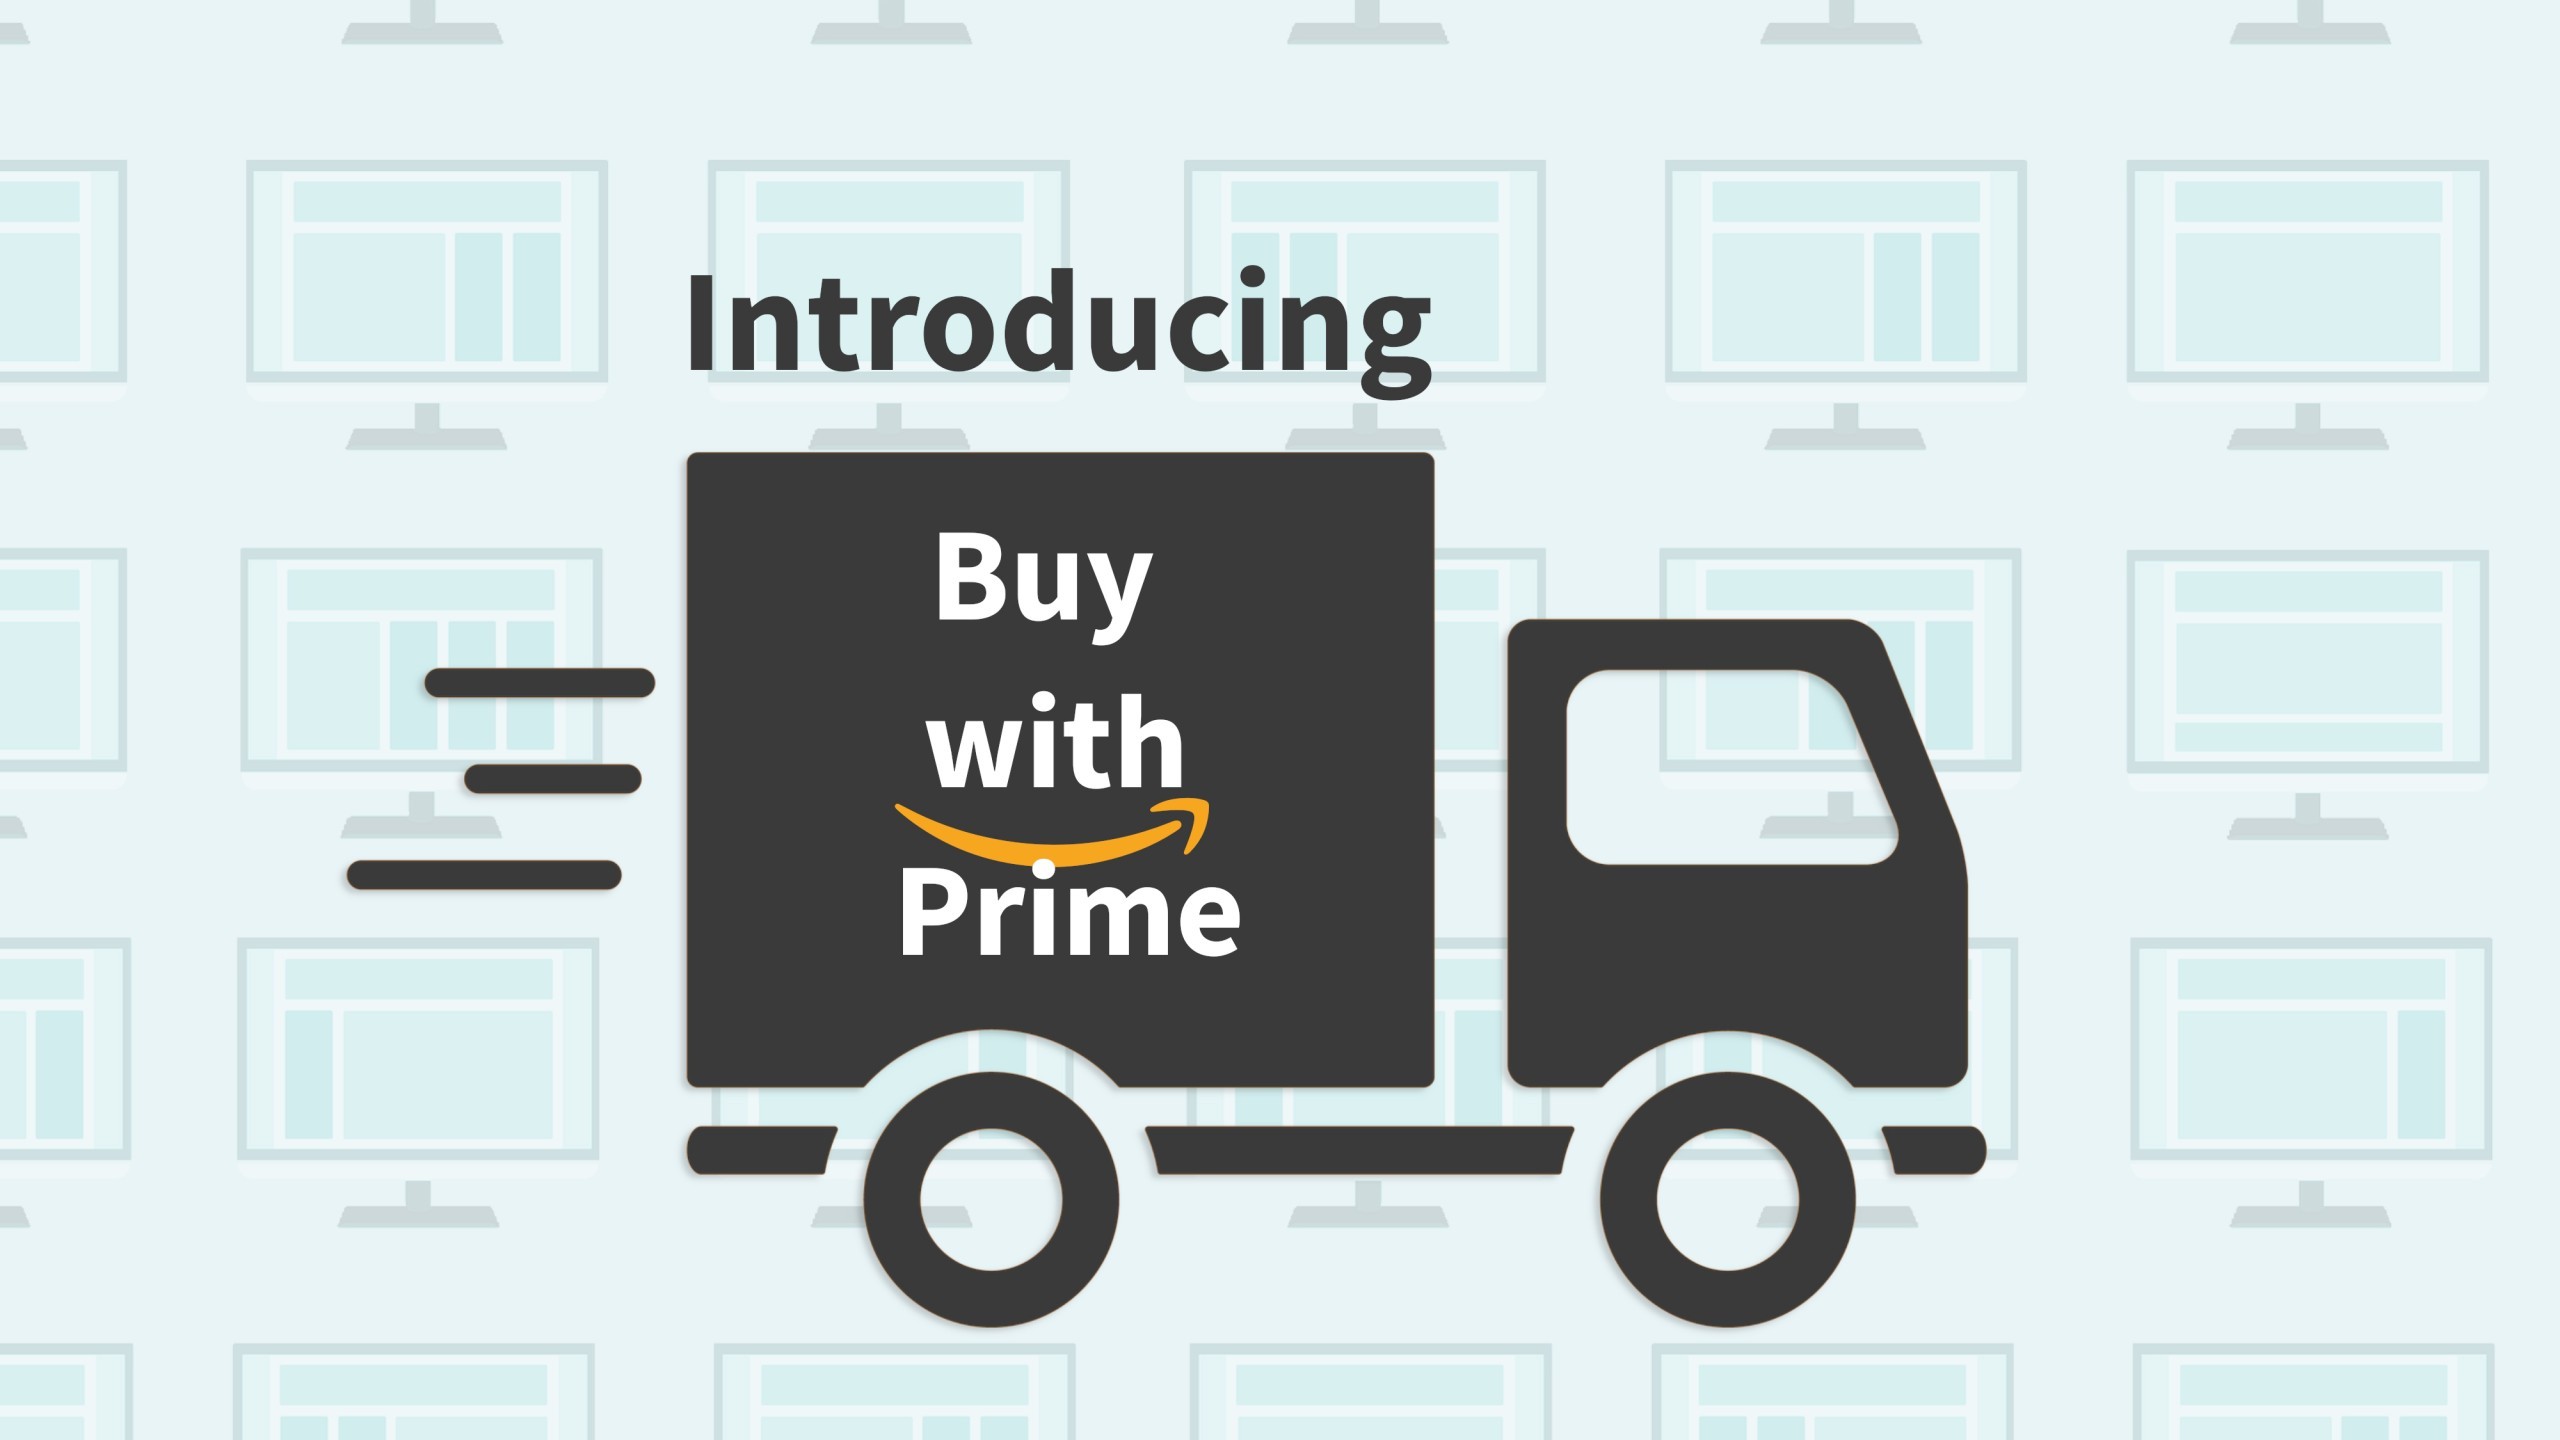 Amazon’s Buy With Prime Unit Faces Layoffs Amid Broader Job Cuts